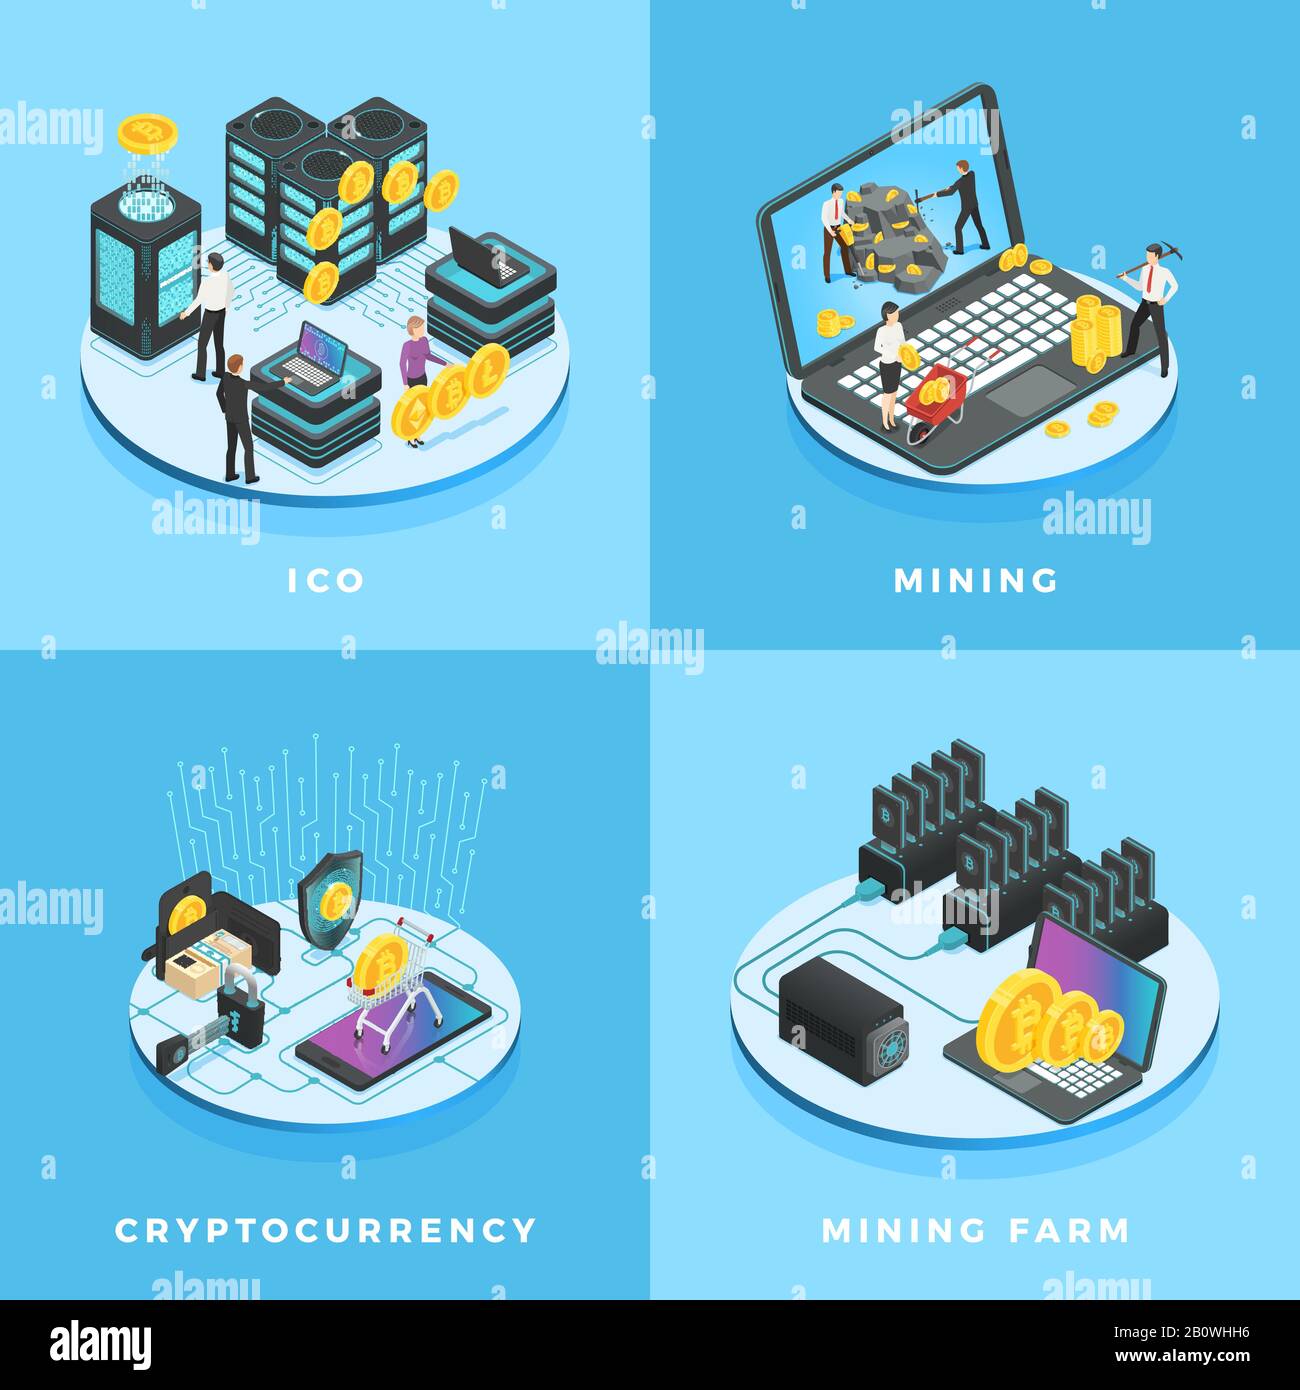 Cryptocurrency illustration. Electronic money, currency mining, ICO and blockchain computer network isometric vector illustration Stock Vector